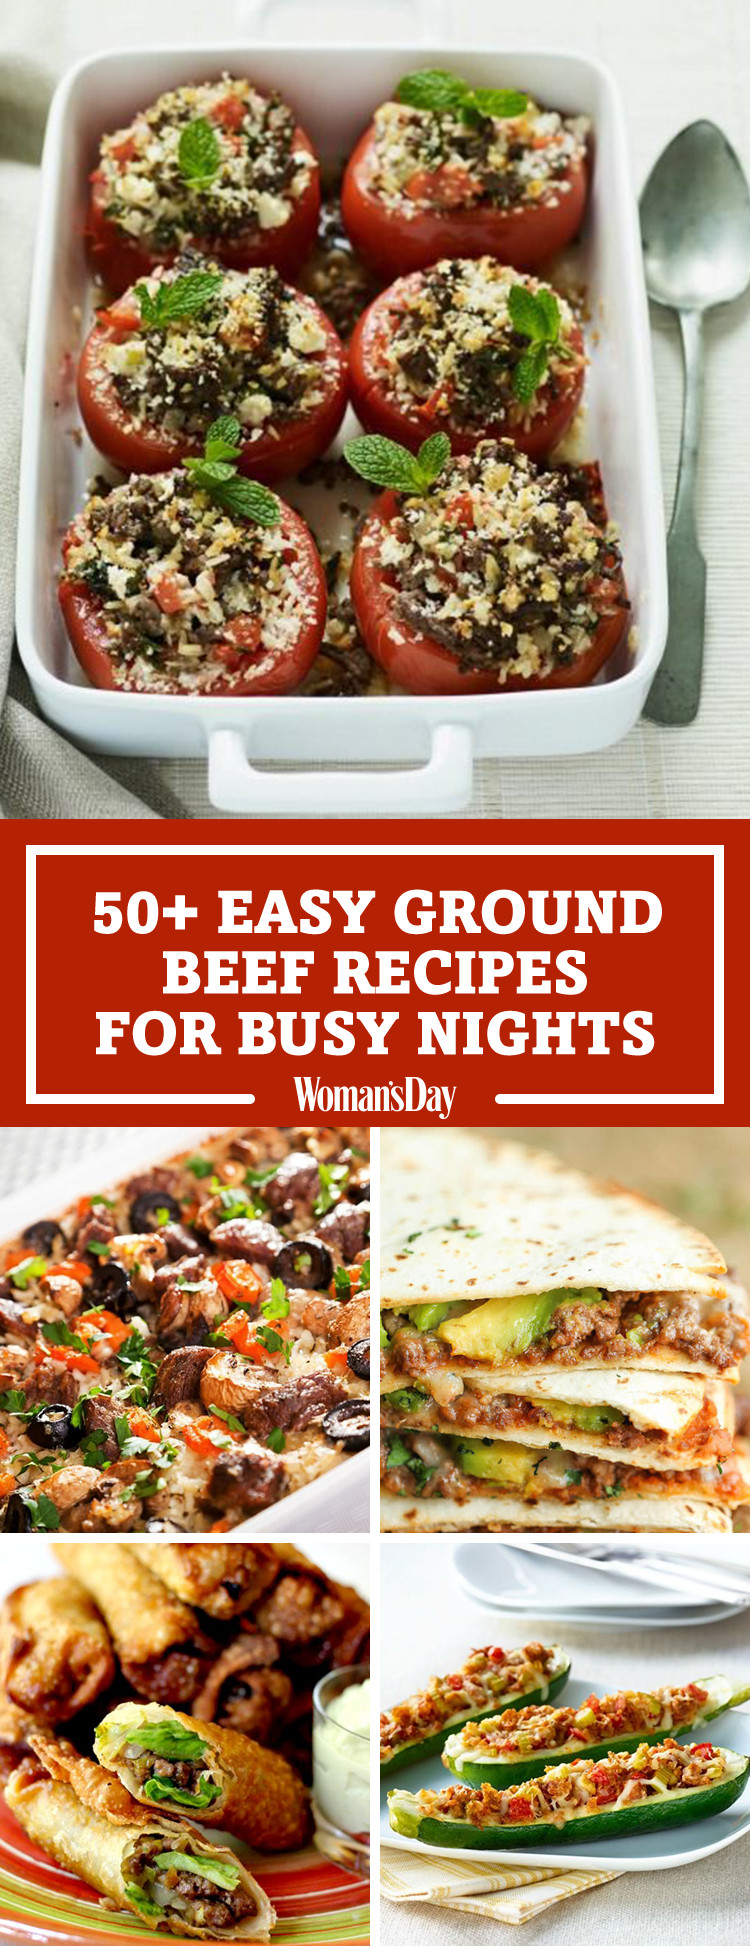 Simple Meals With Ground Beef
 55 Easy Ground Beef Recipes Healthy Recipes with Ground